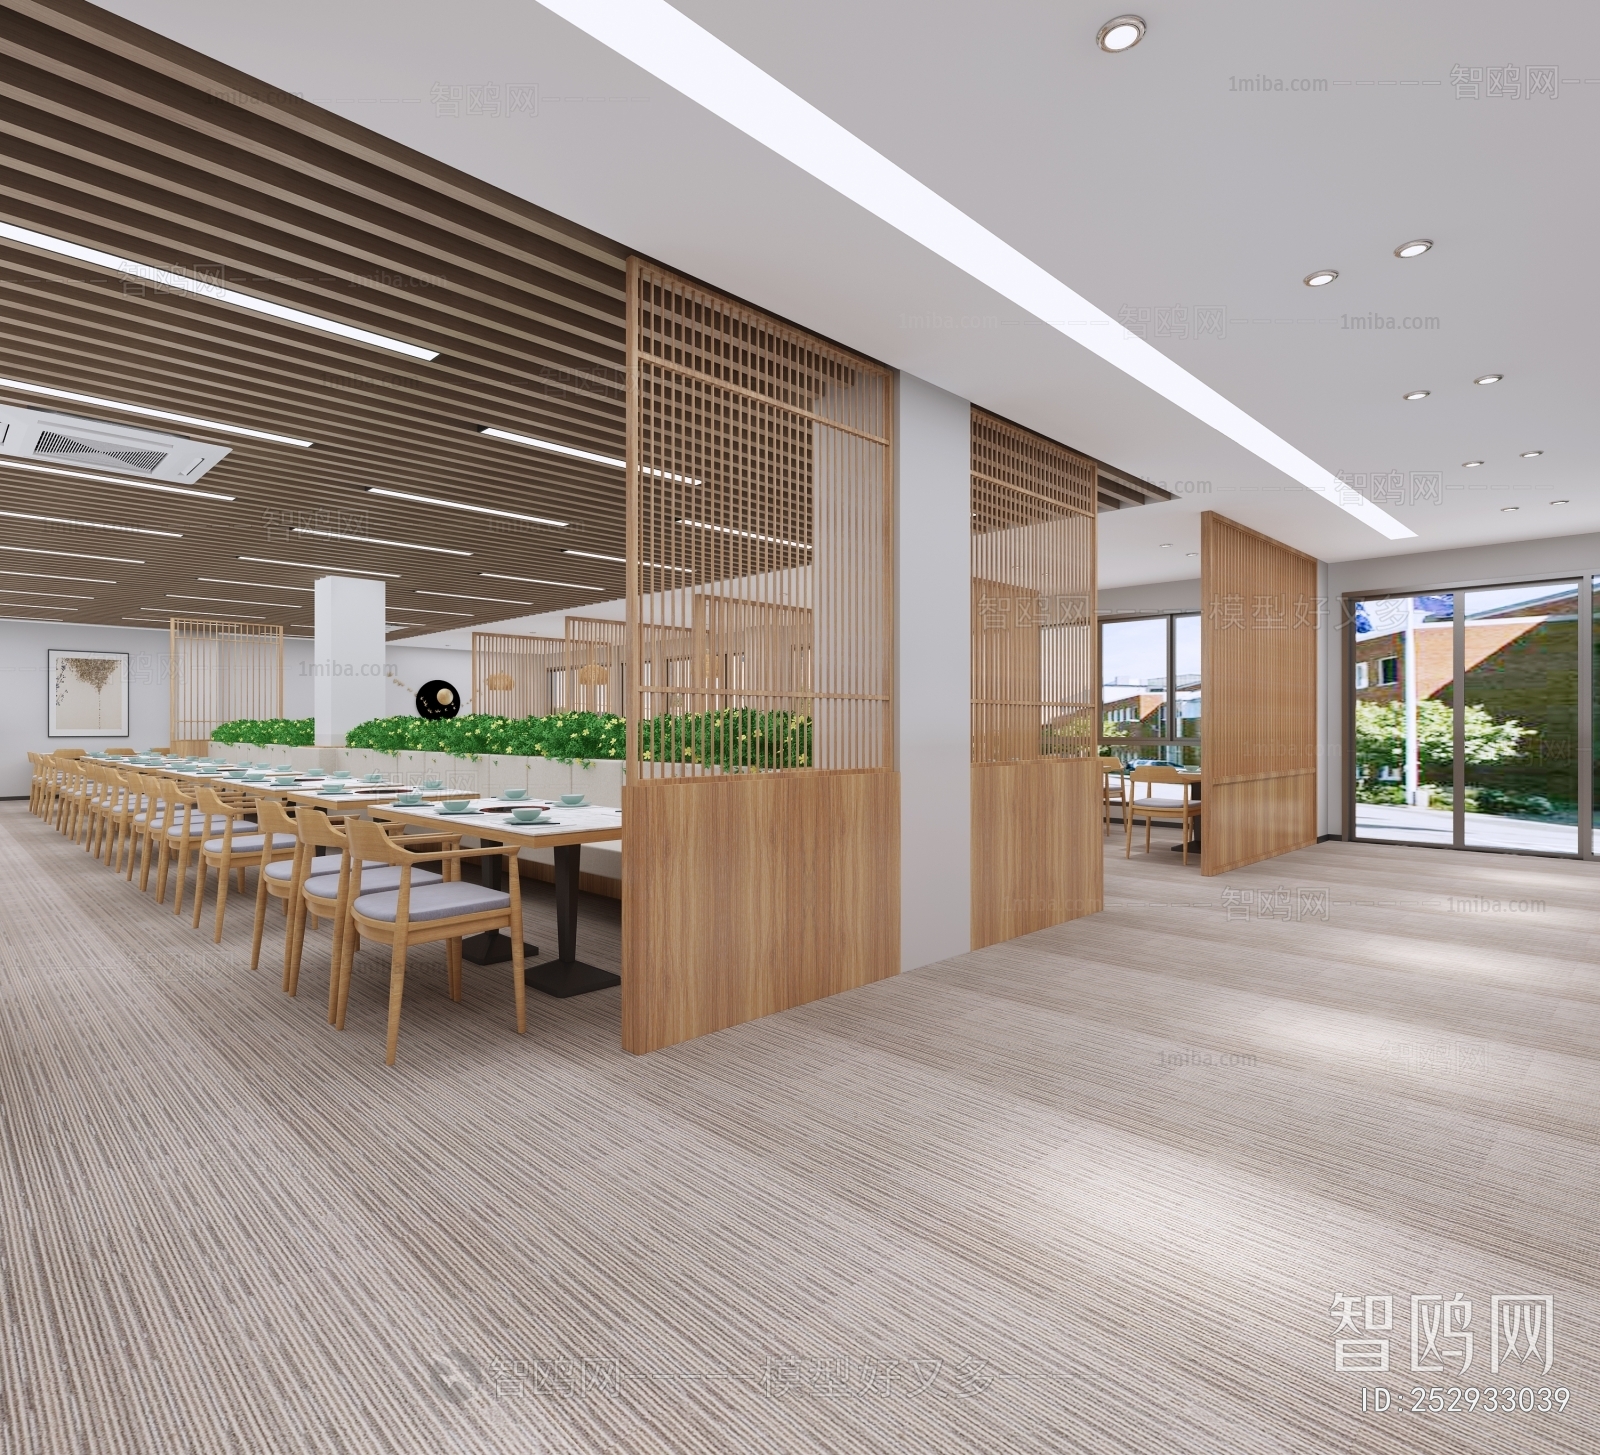 New Chinese Style Office Canteen